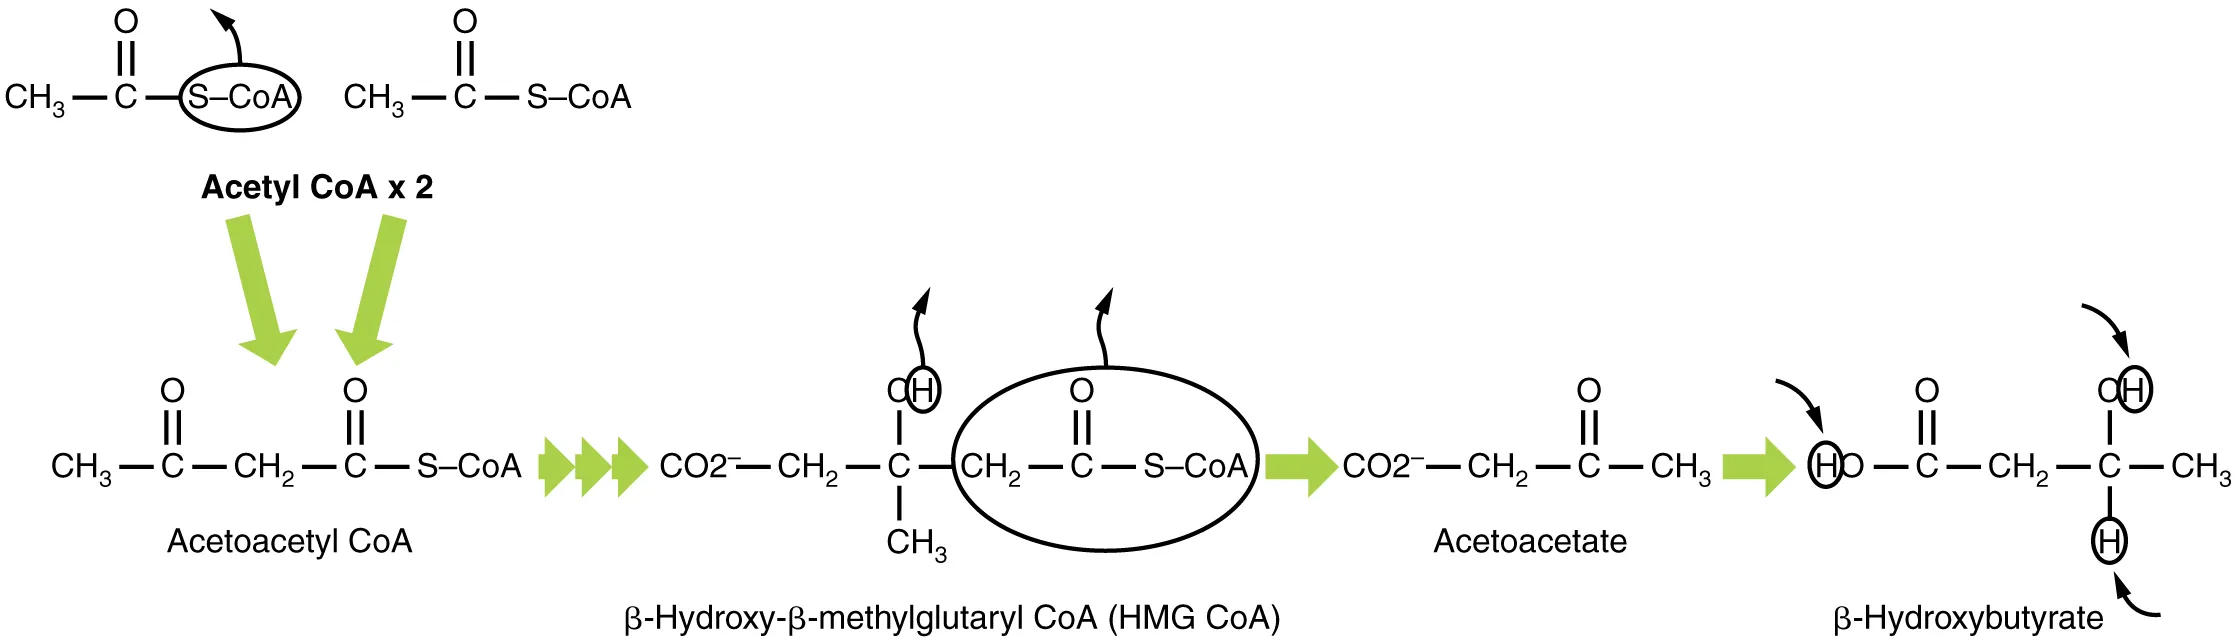 This pathway shows the production of beta-hydroxybutyrate from acetyl-CoA.